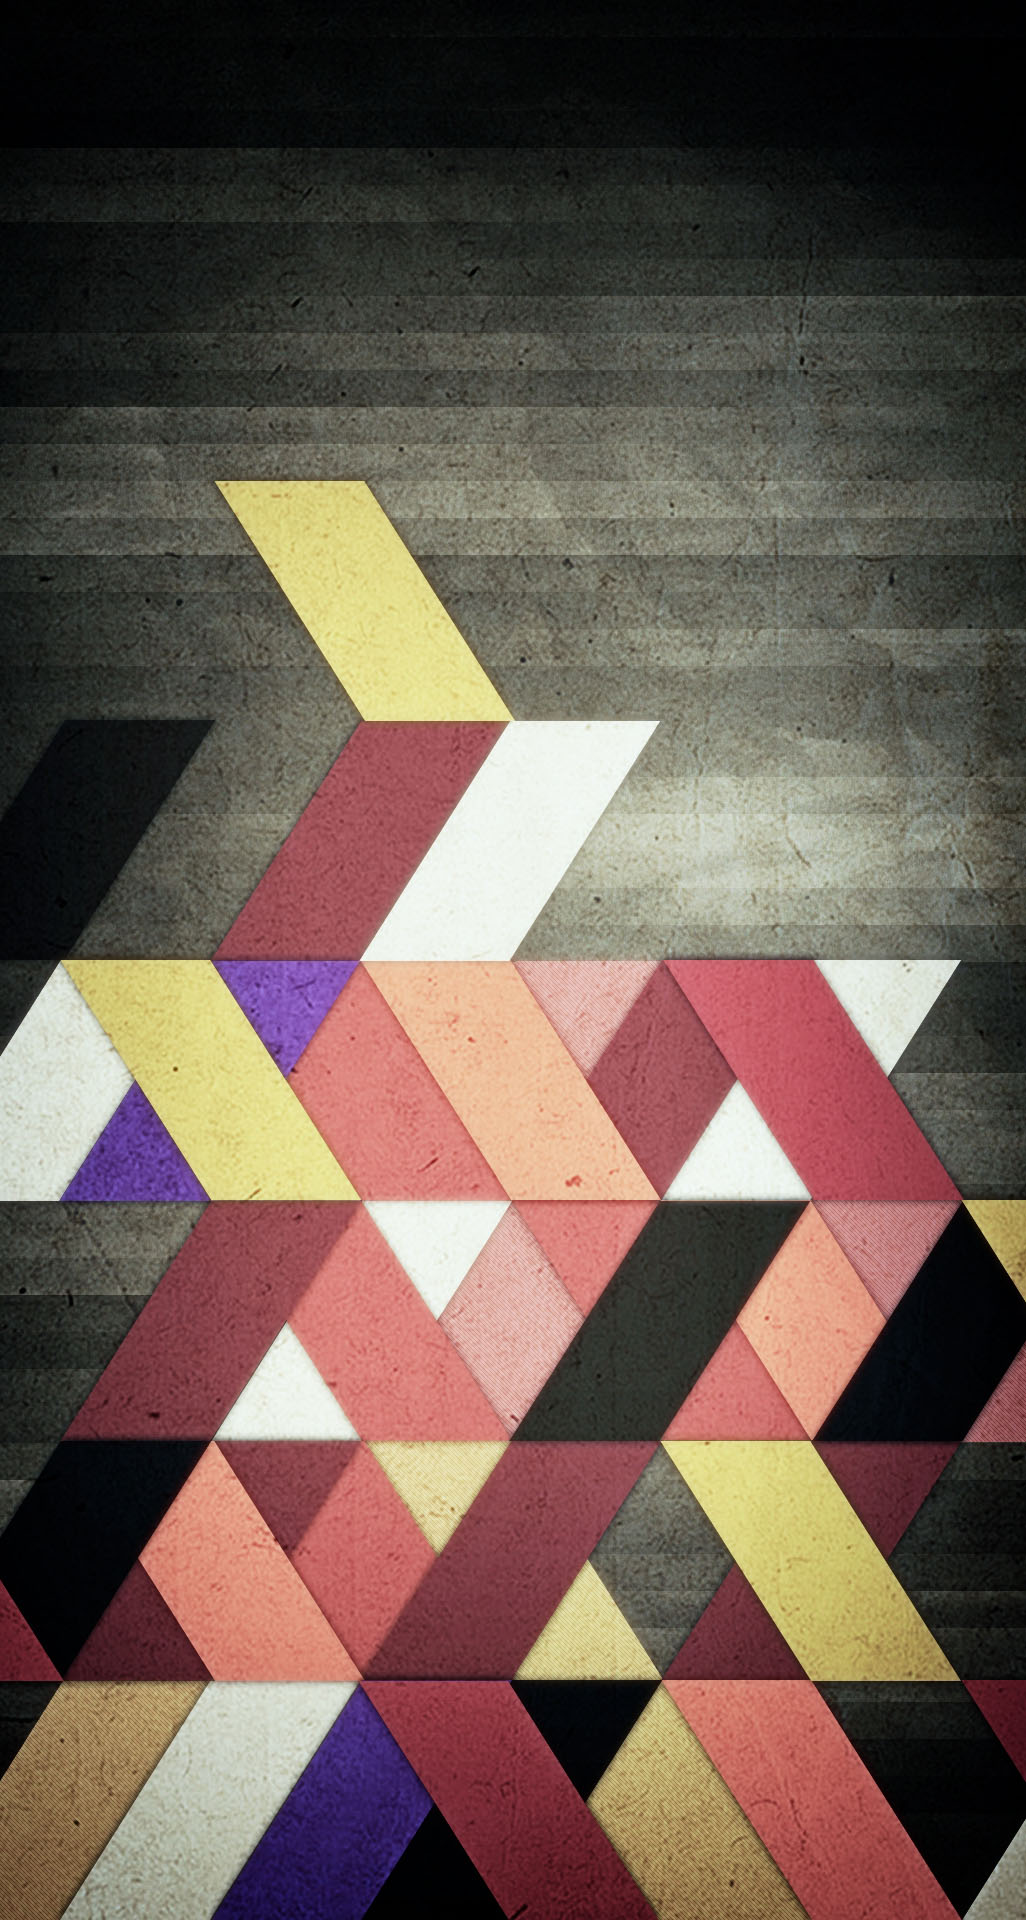 Abstract Shapes Geometric - The iPhone Wallpapers